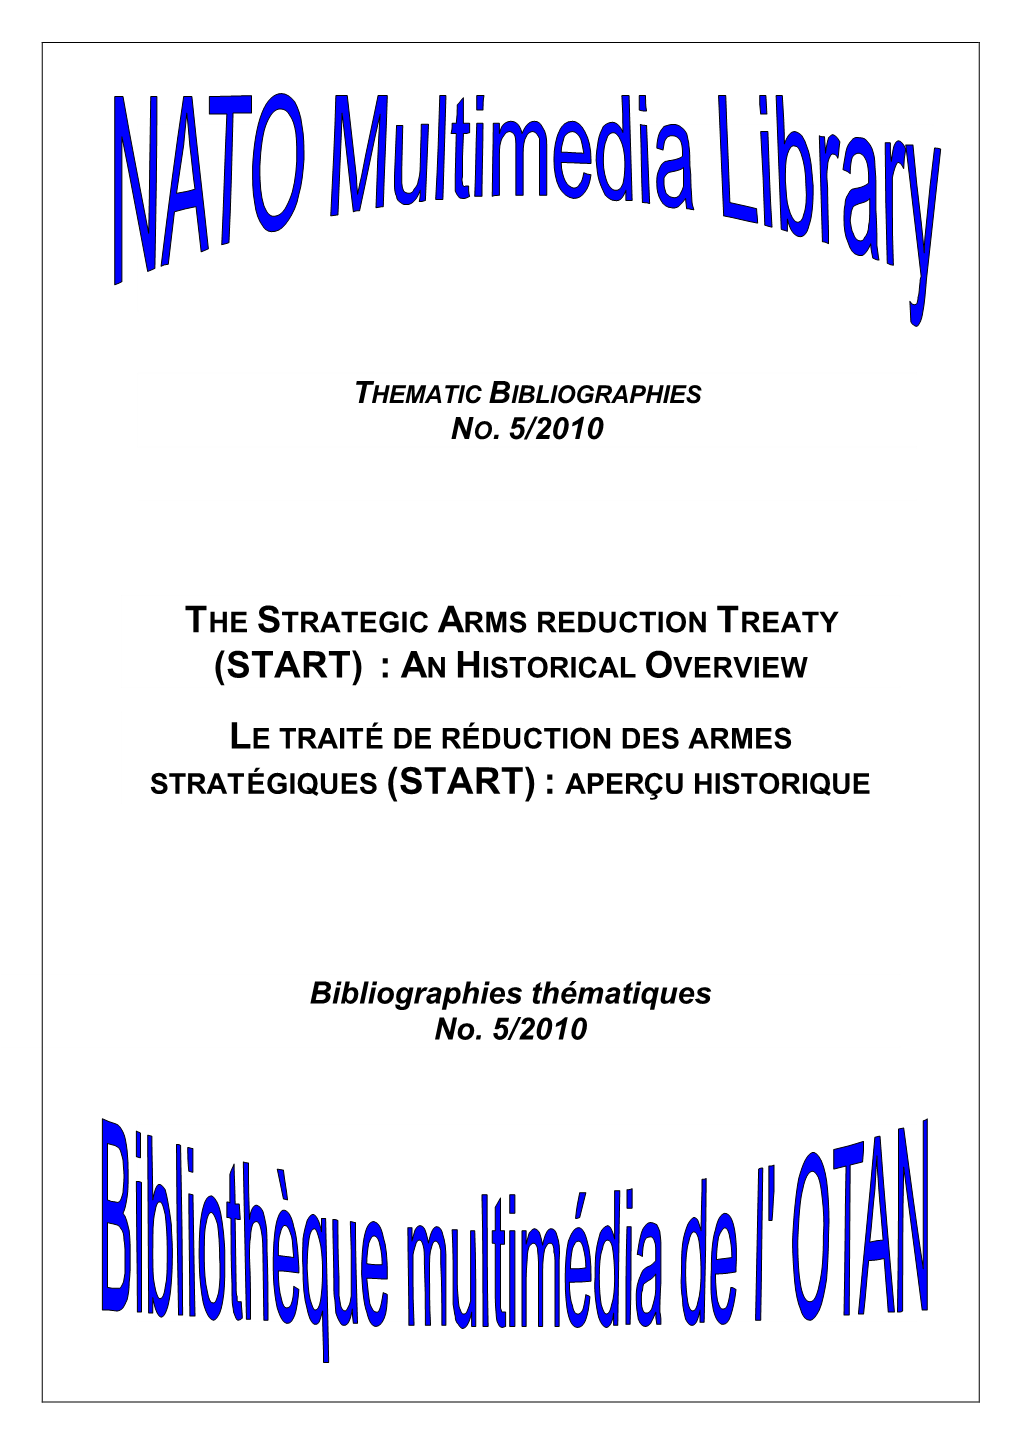 The Strategic Arms Reduction Treaty (Start) : an Historical Overview